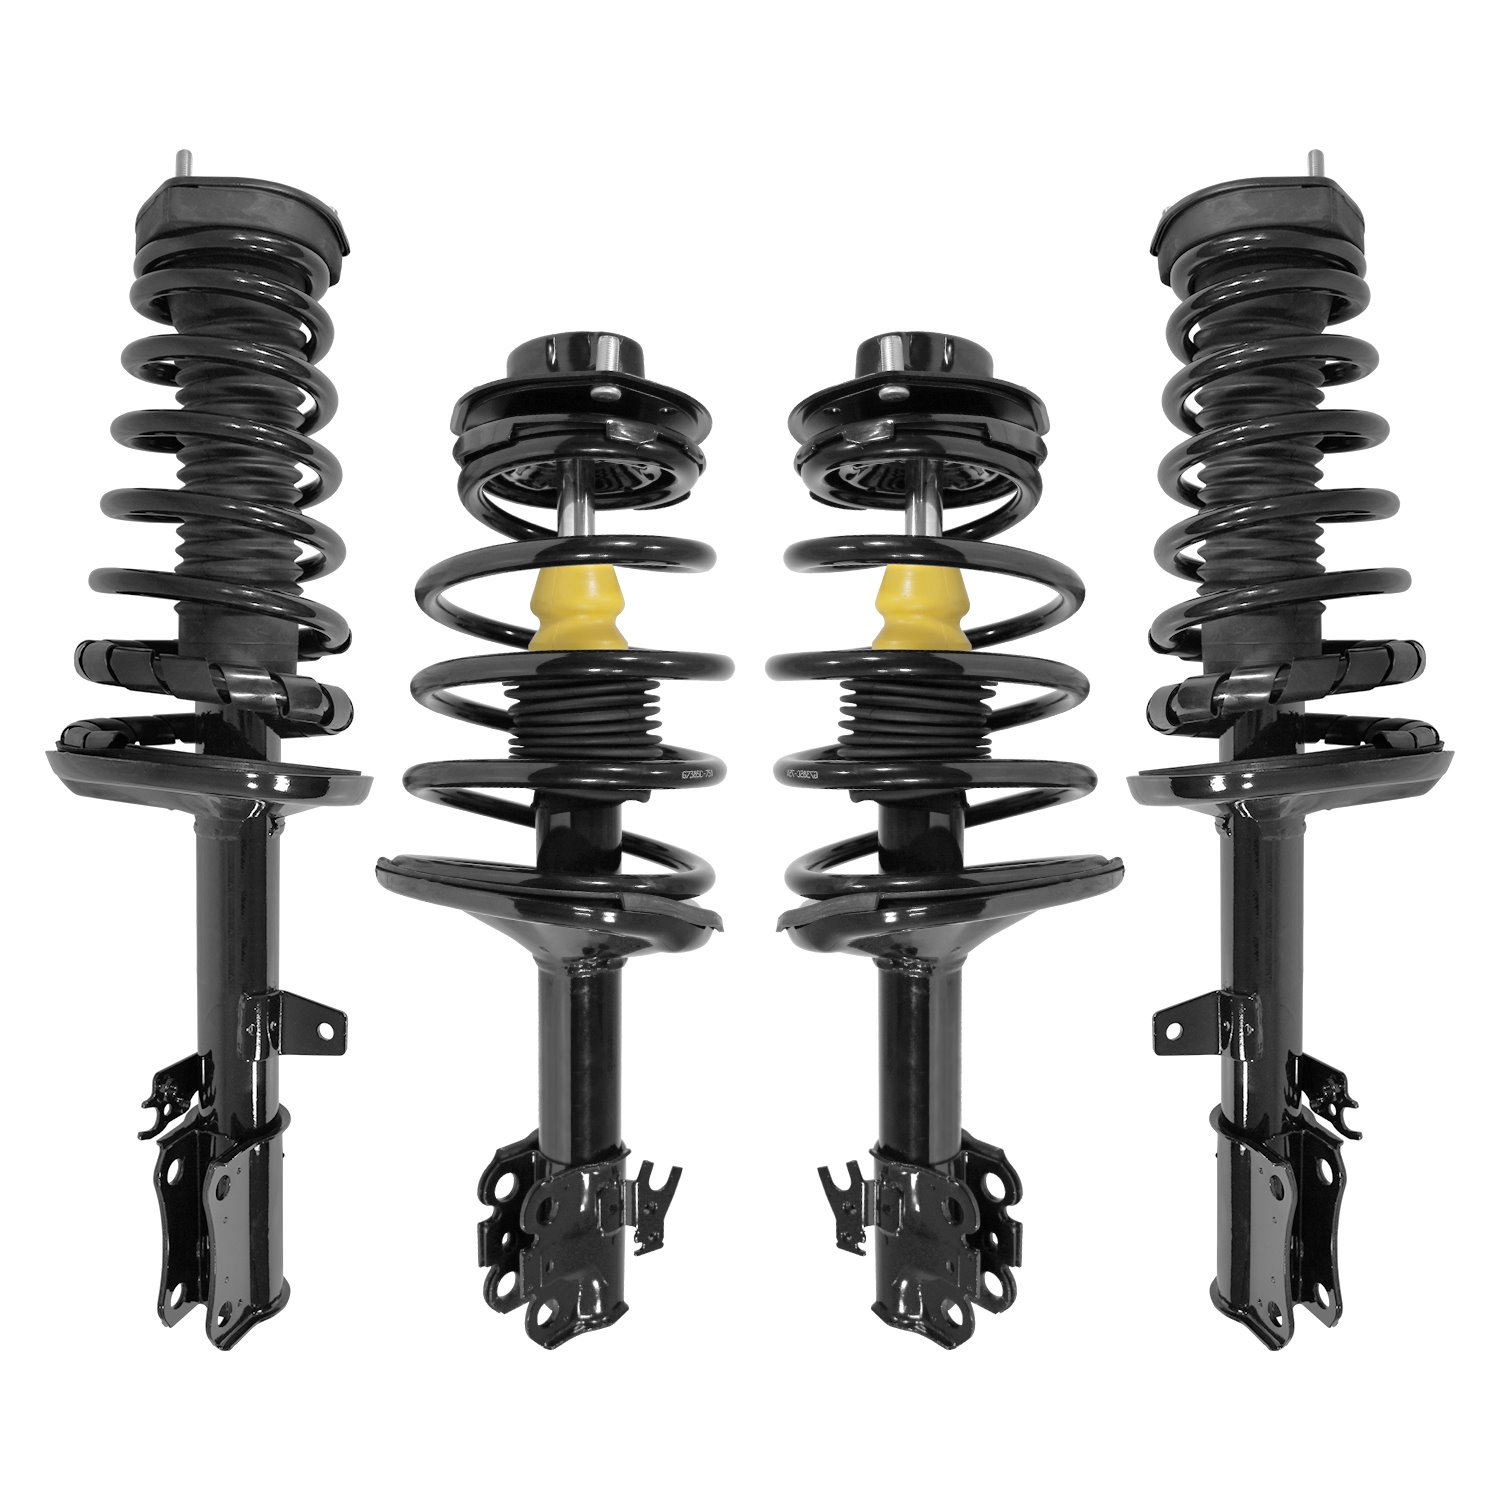 4-11551-15321-001 Front & Rear Suspension Strut & Coil Spring Assembly Kit Fits Select Toyota Camry